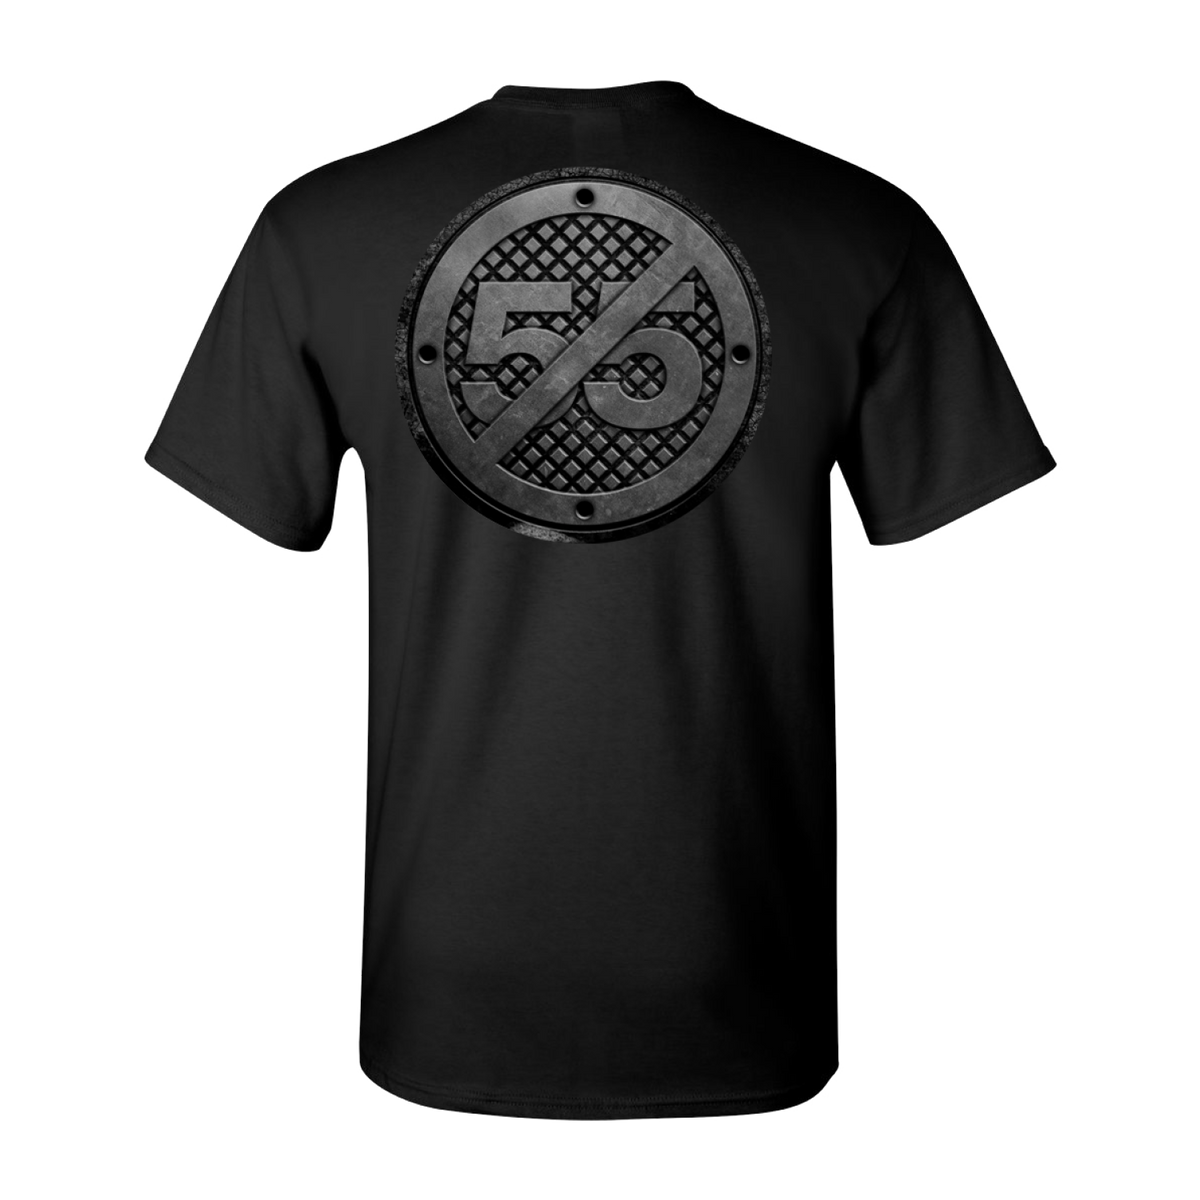 Sammy Hagar and The Circle &quot;55 Manhole Cover&quot; Tee